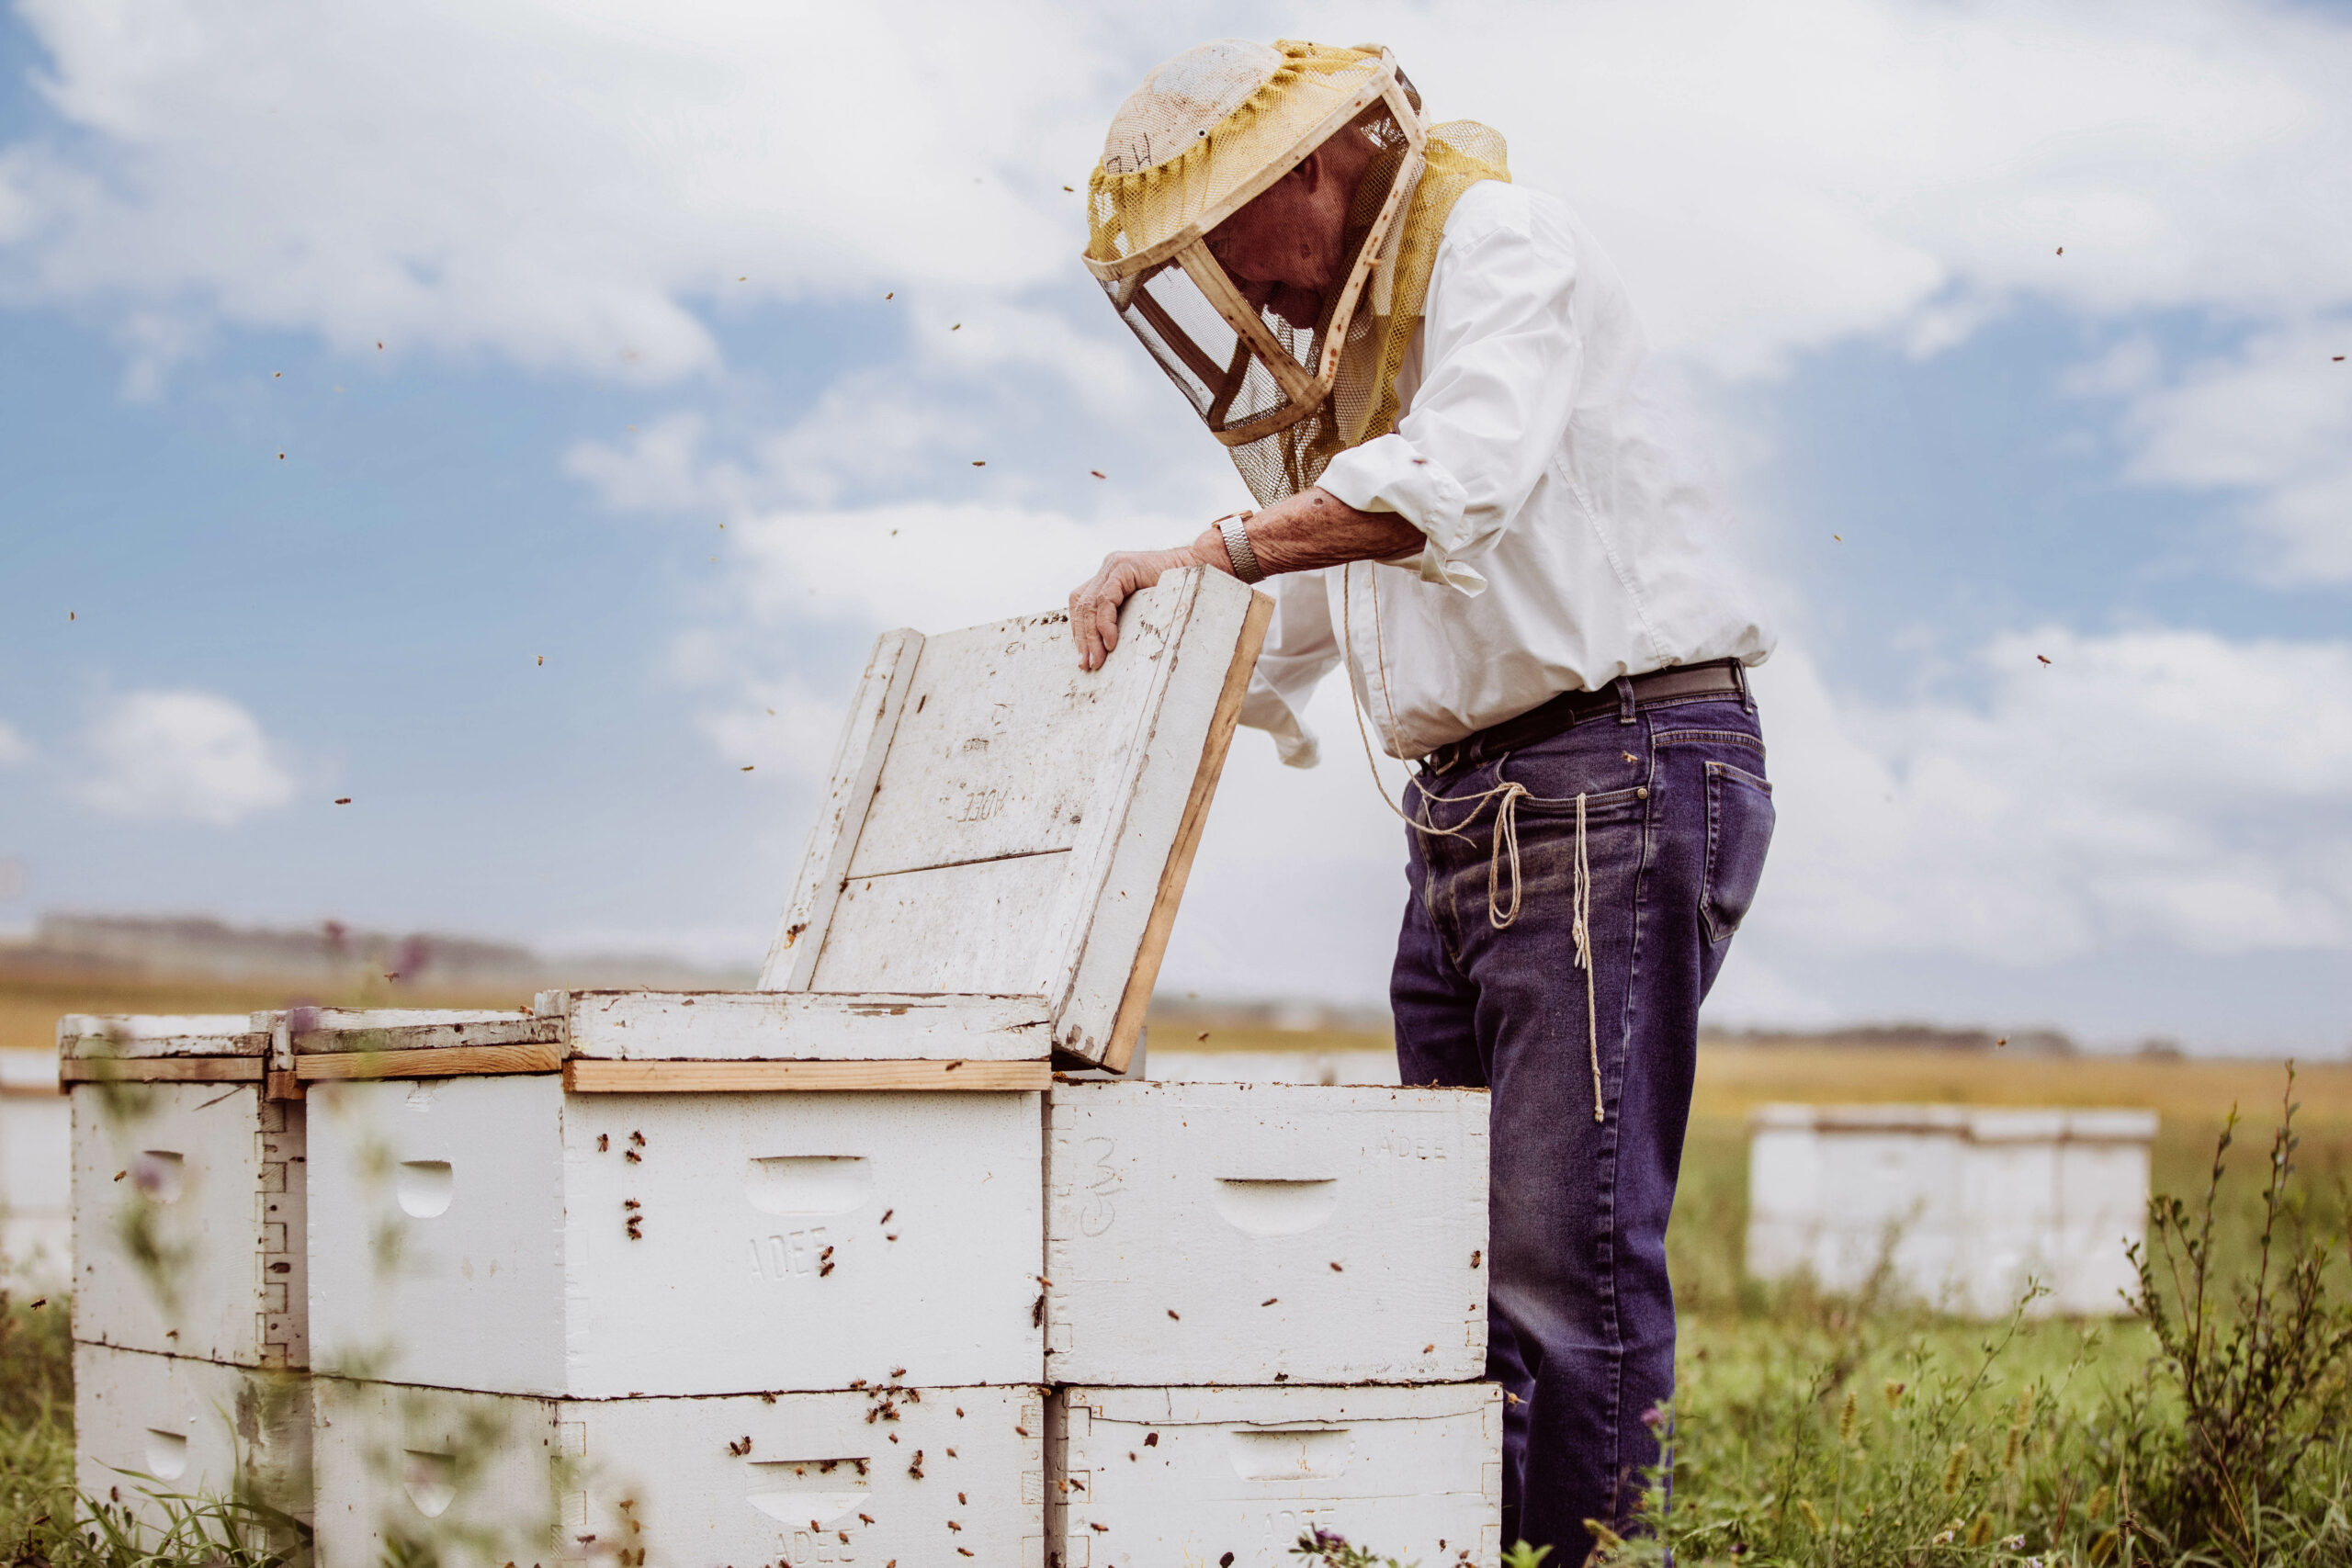 Richard Adee with an open bee hive in the field